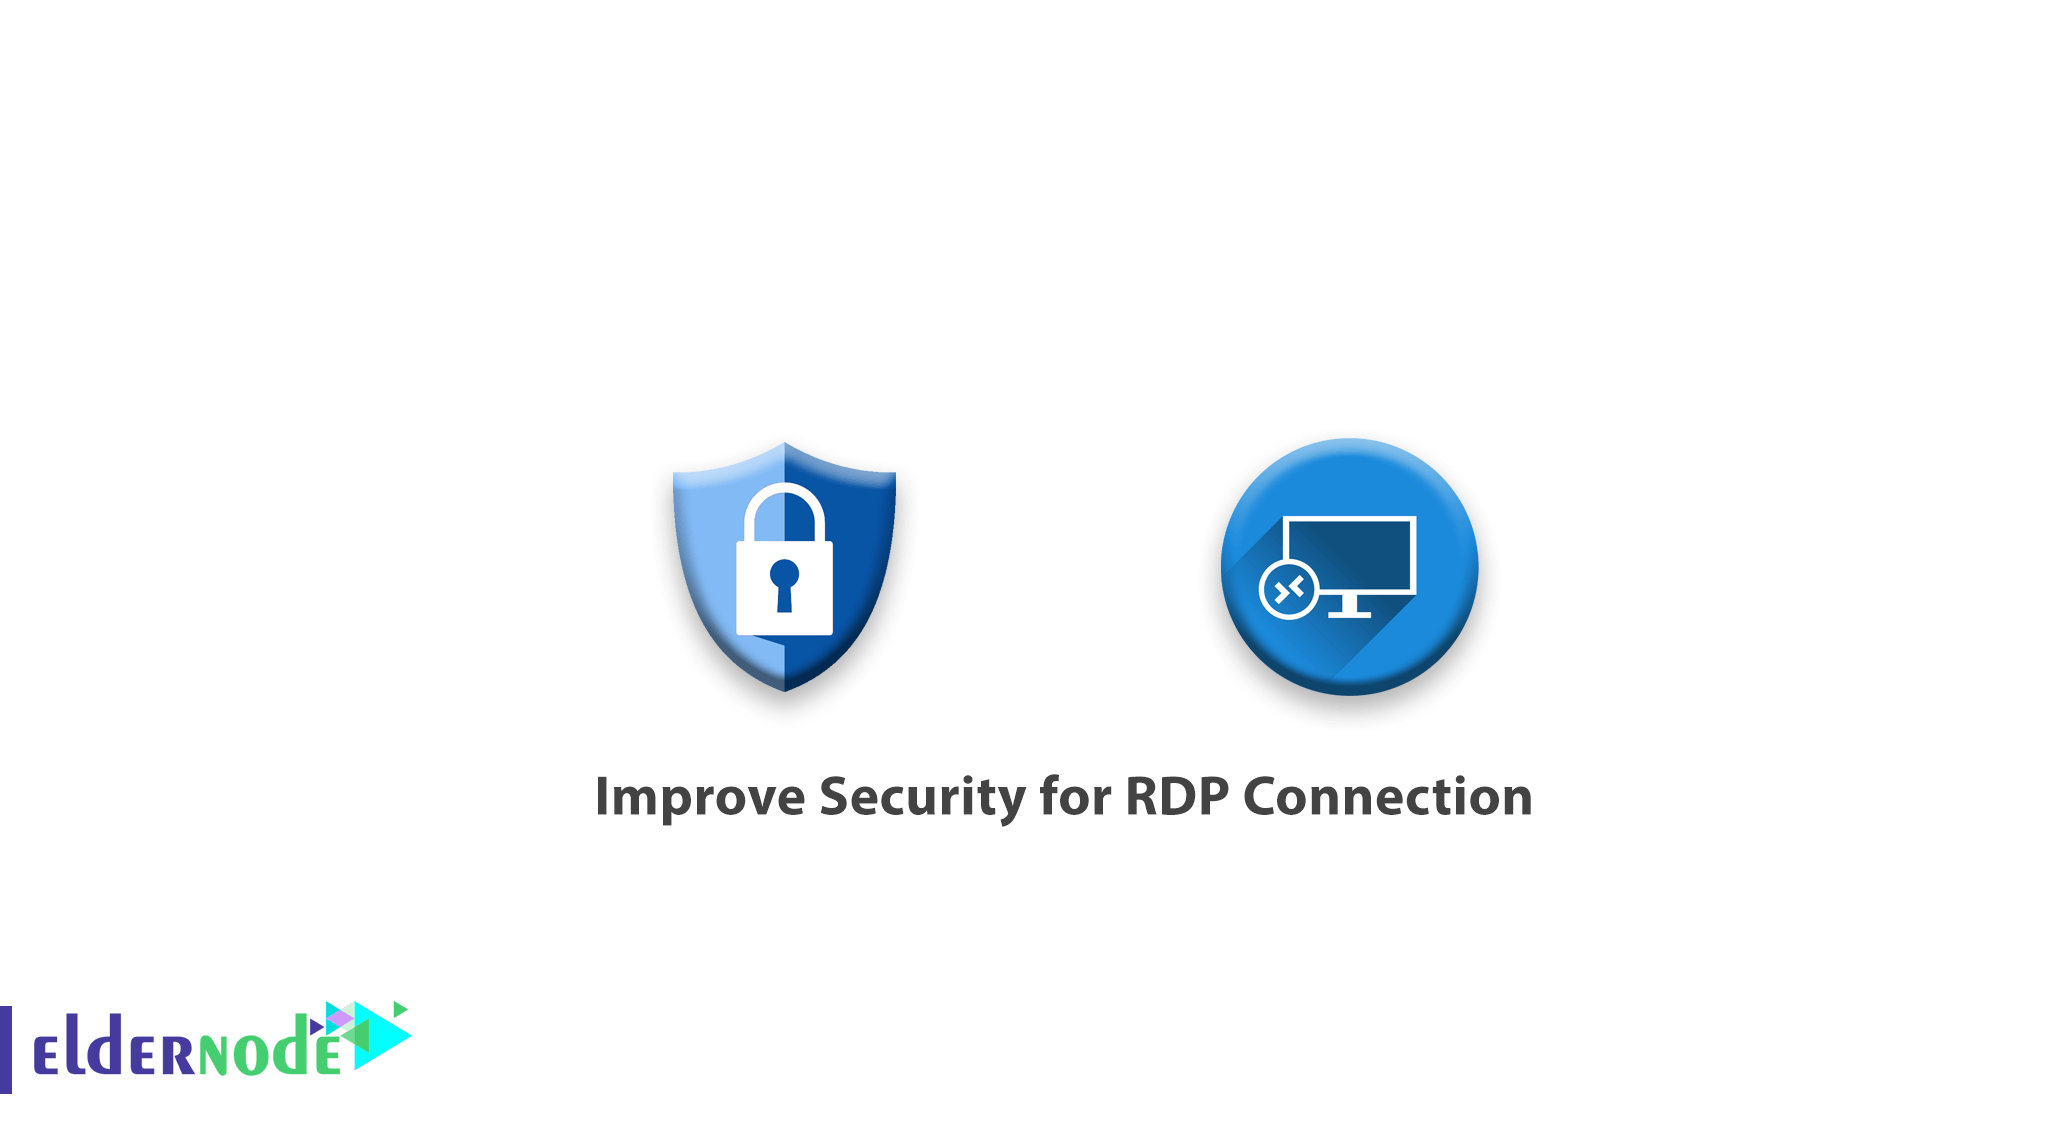 How to Improve Security for RDP Connection